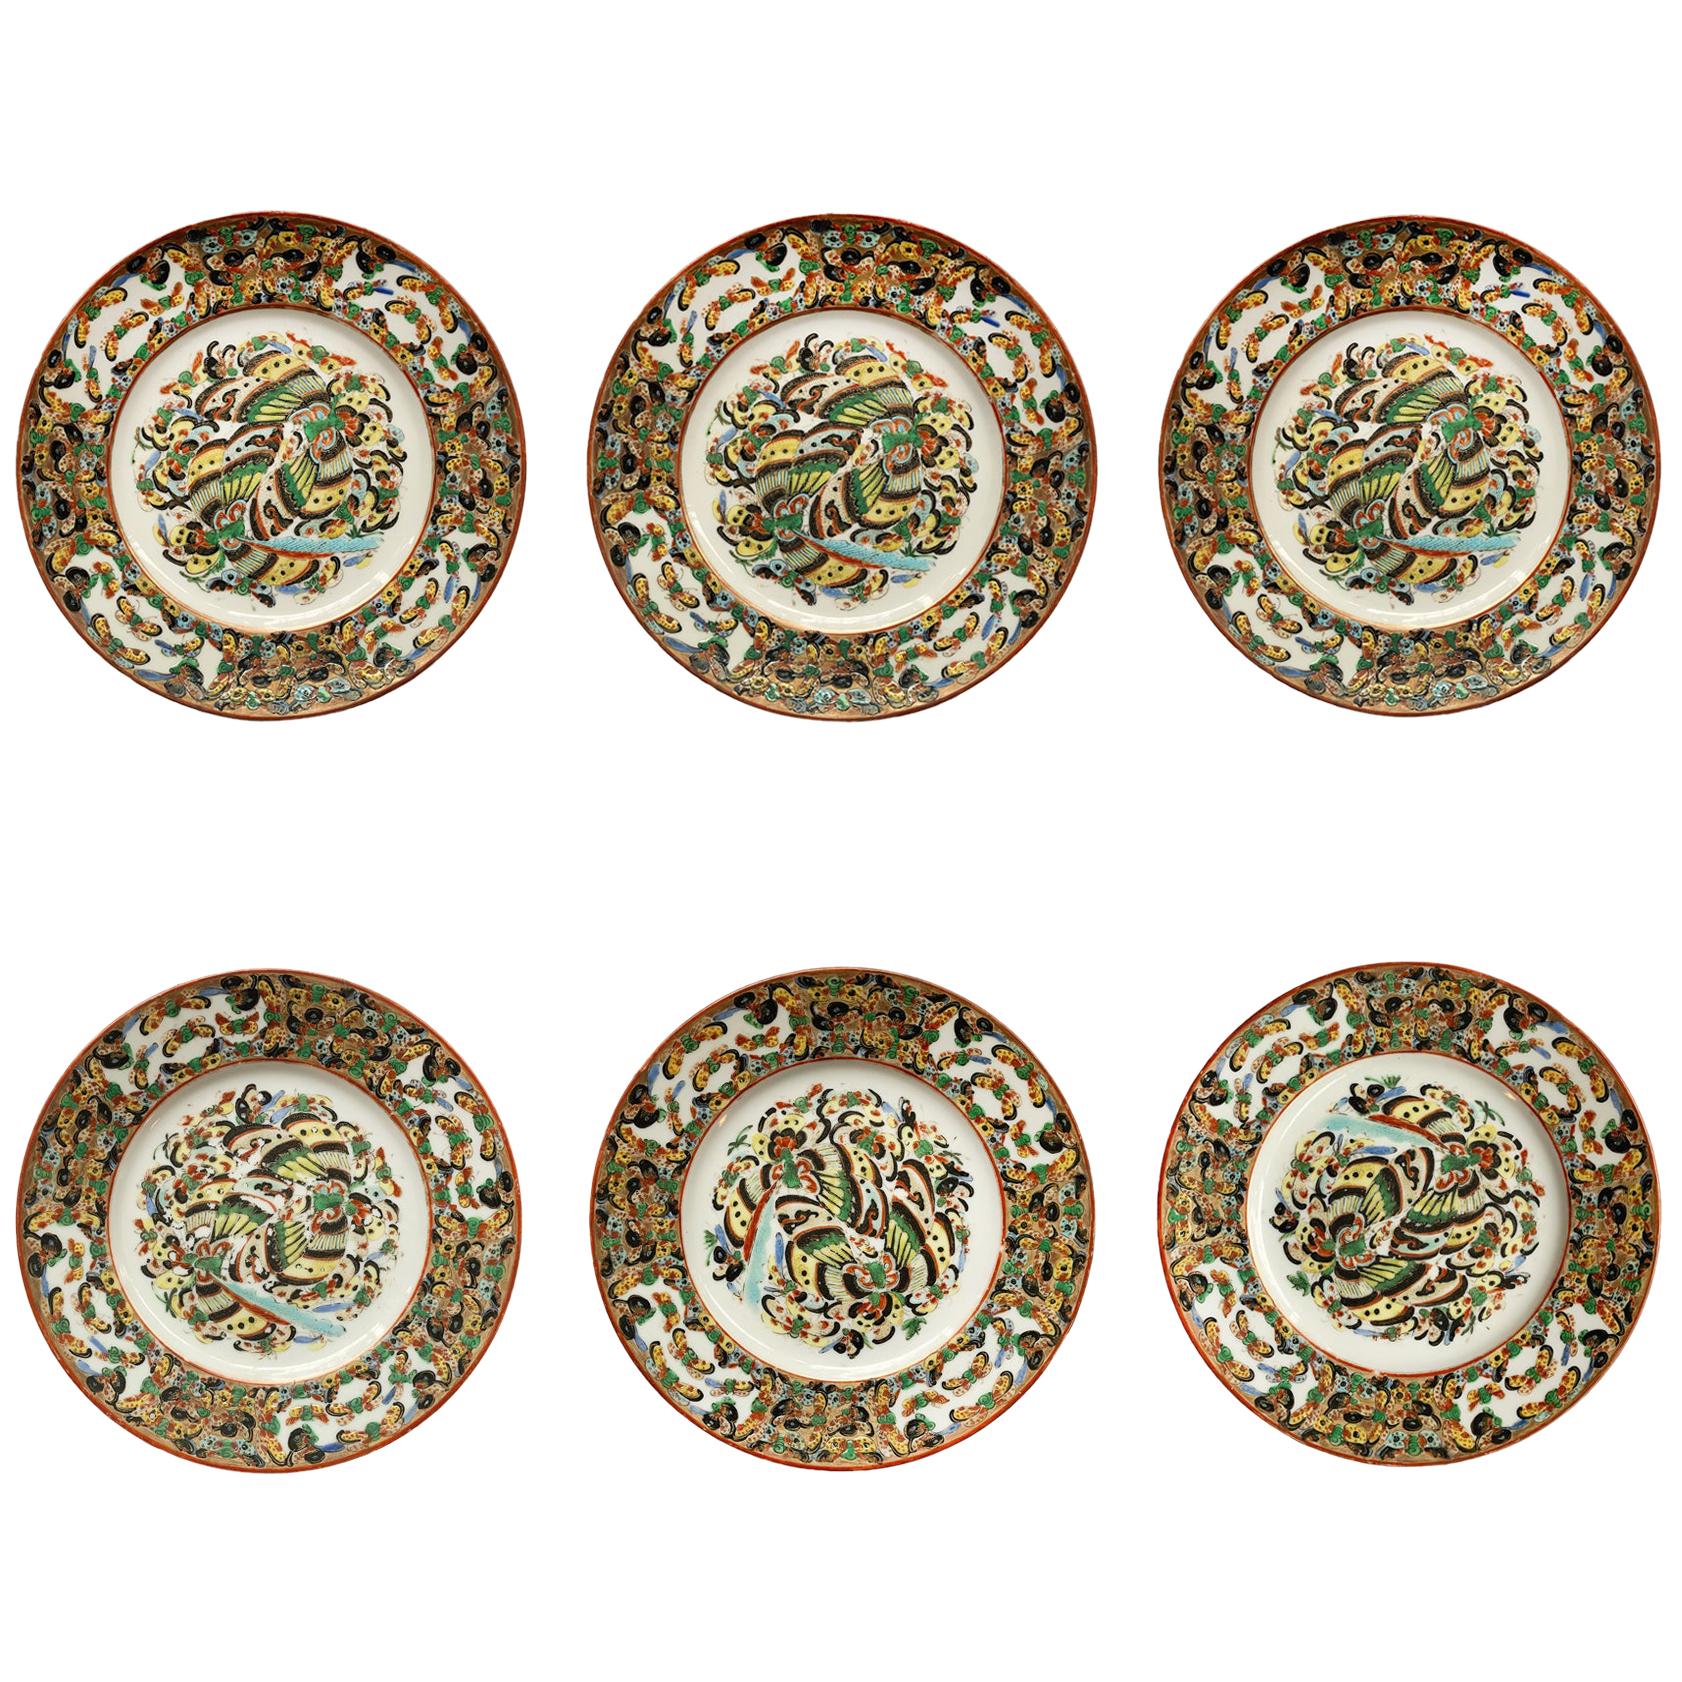 20th Century Chinese Decorative Plates, a Set of 6